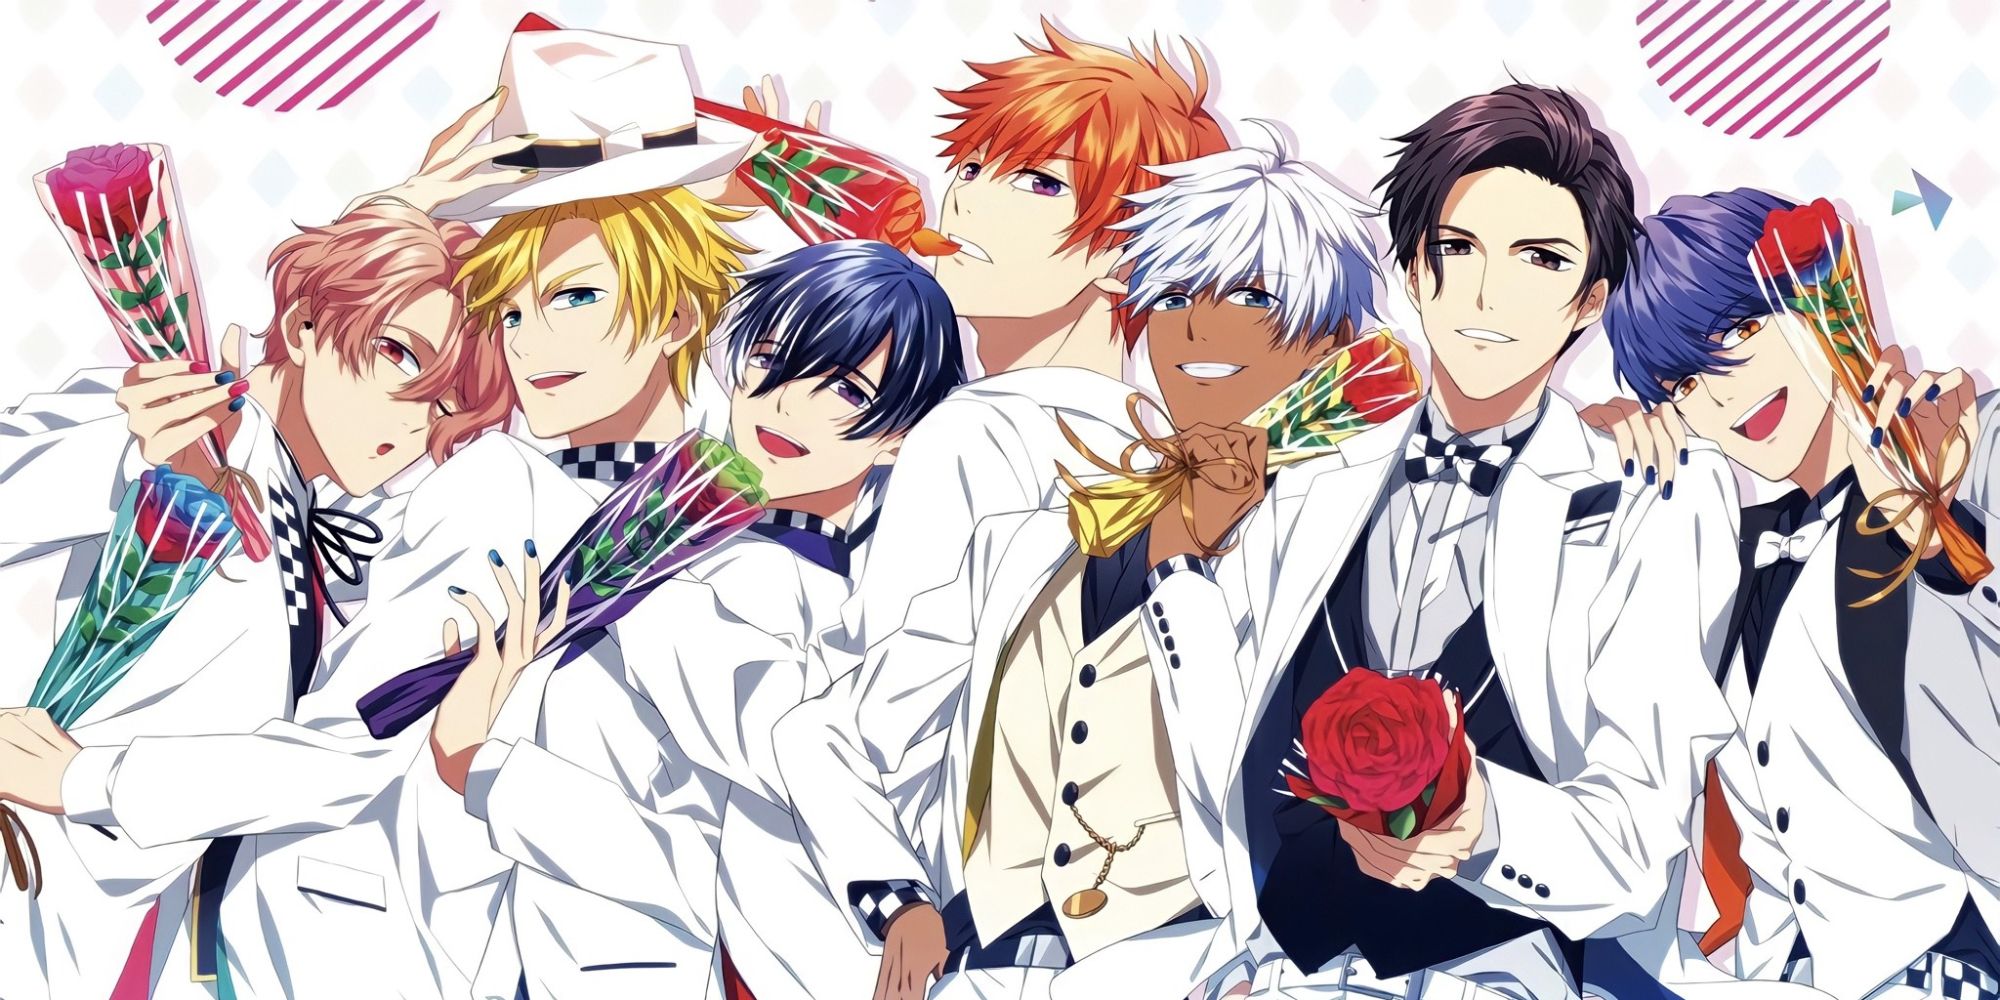 Mammon ♡ | Obey me!, Handsome anime guys, Handsome anime